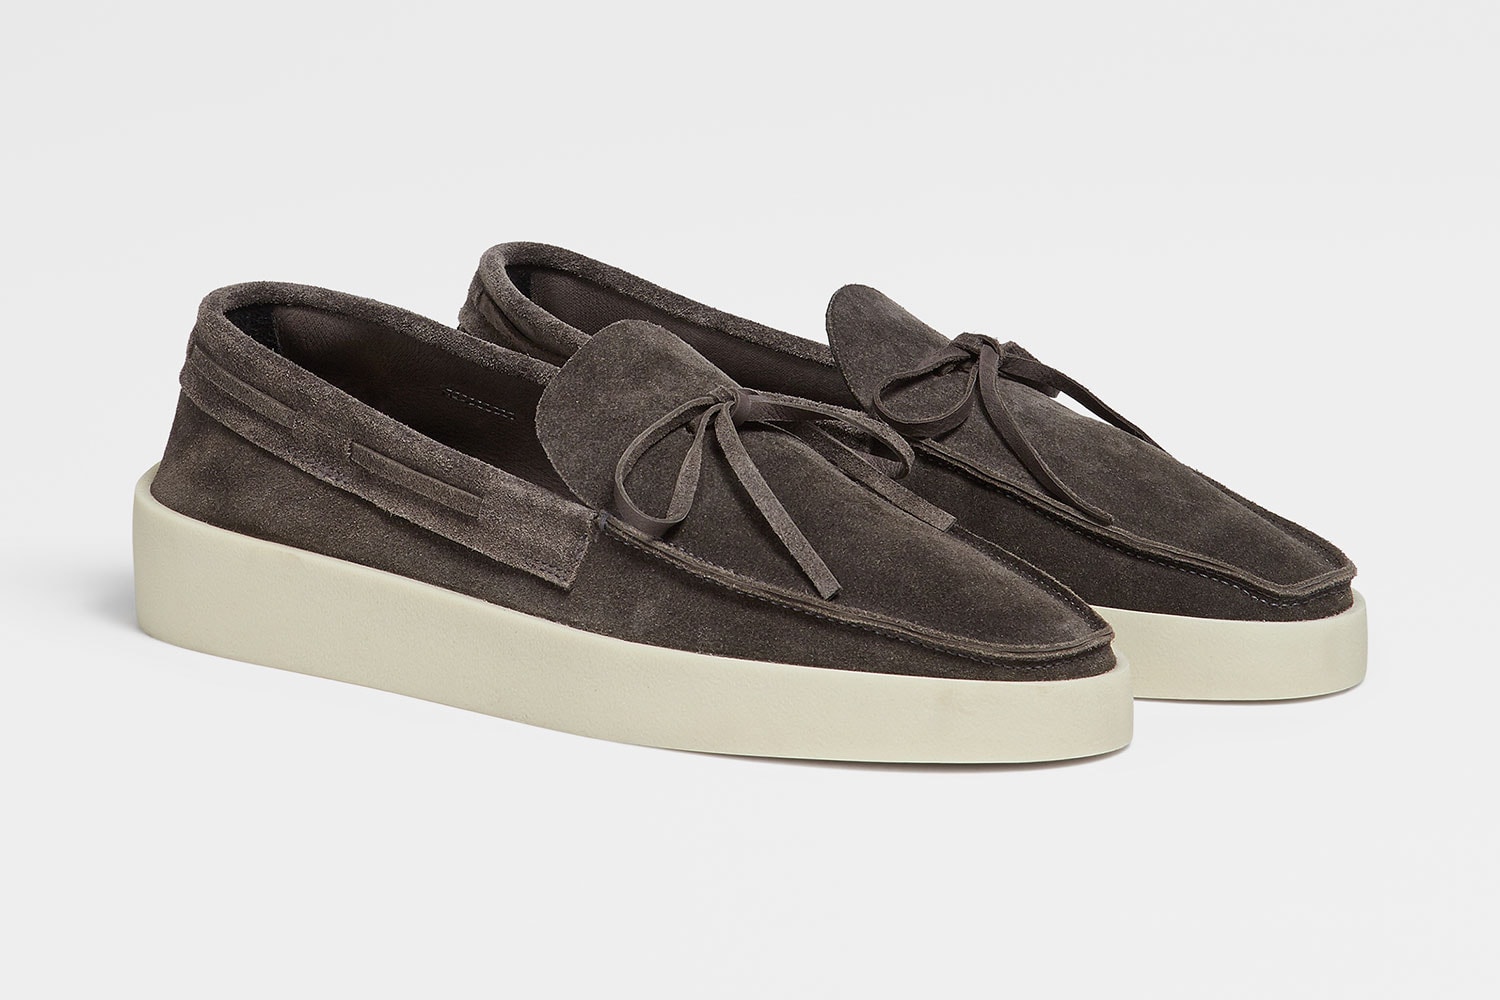 Fear of God Exclusively for Ermenegildo Zegna Footwear Collection suede lace up loafers menswear release info